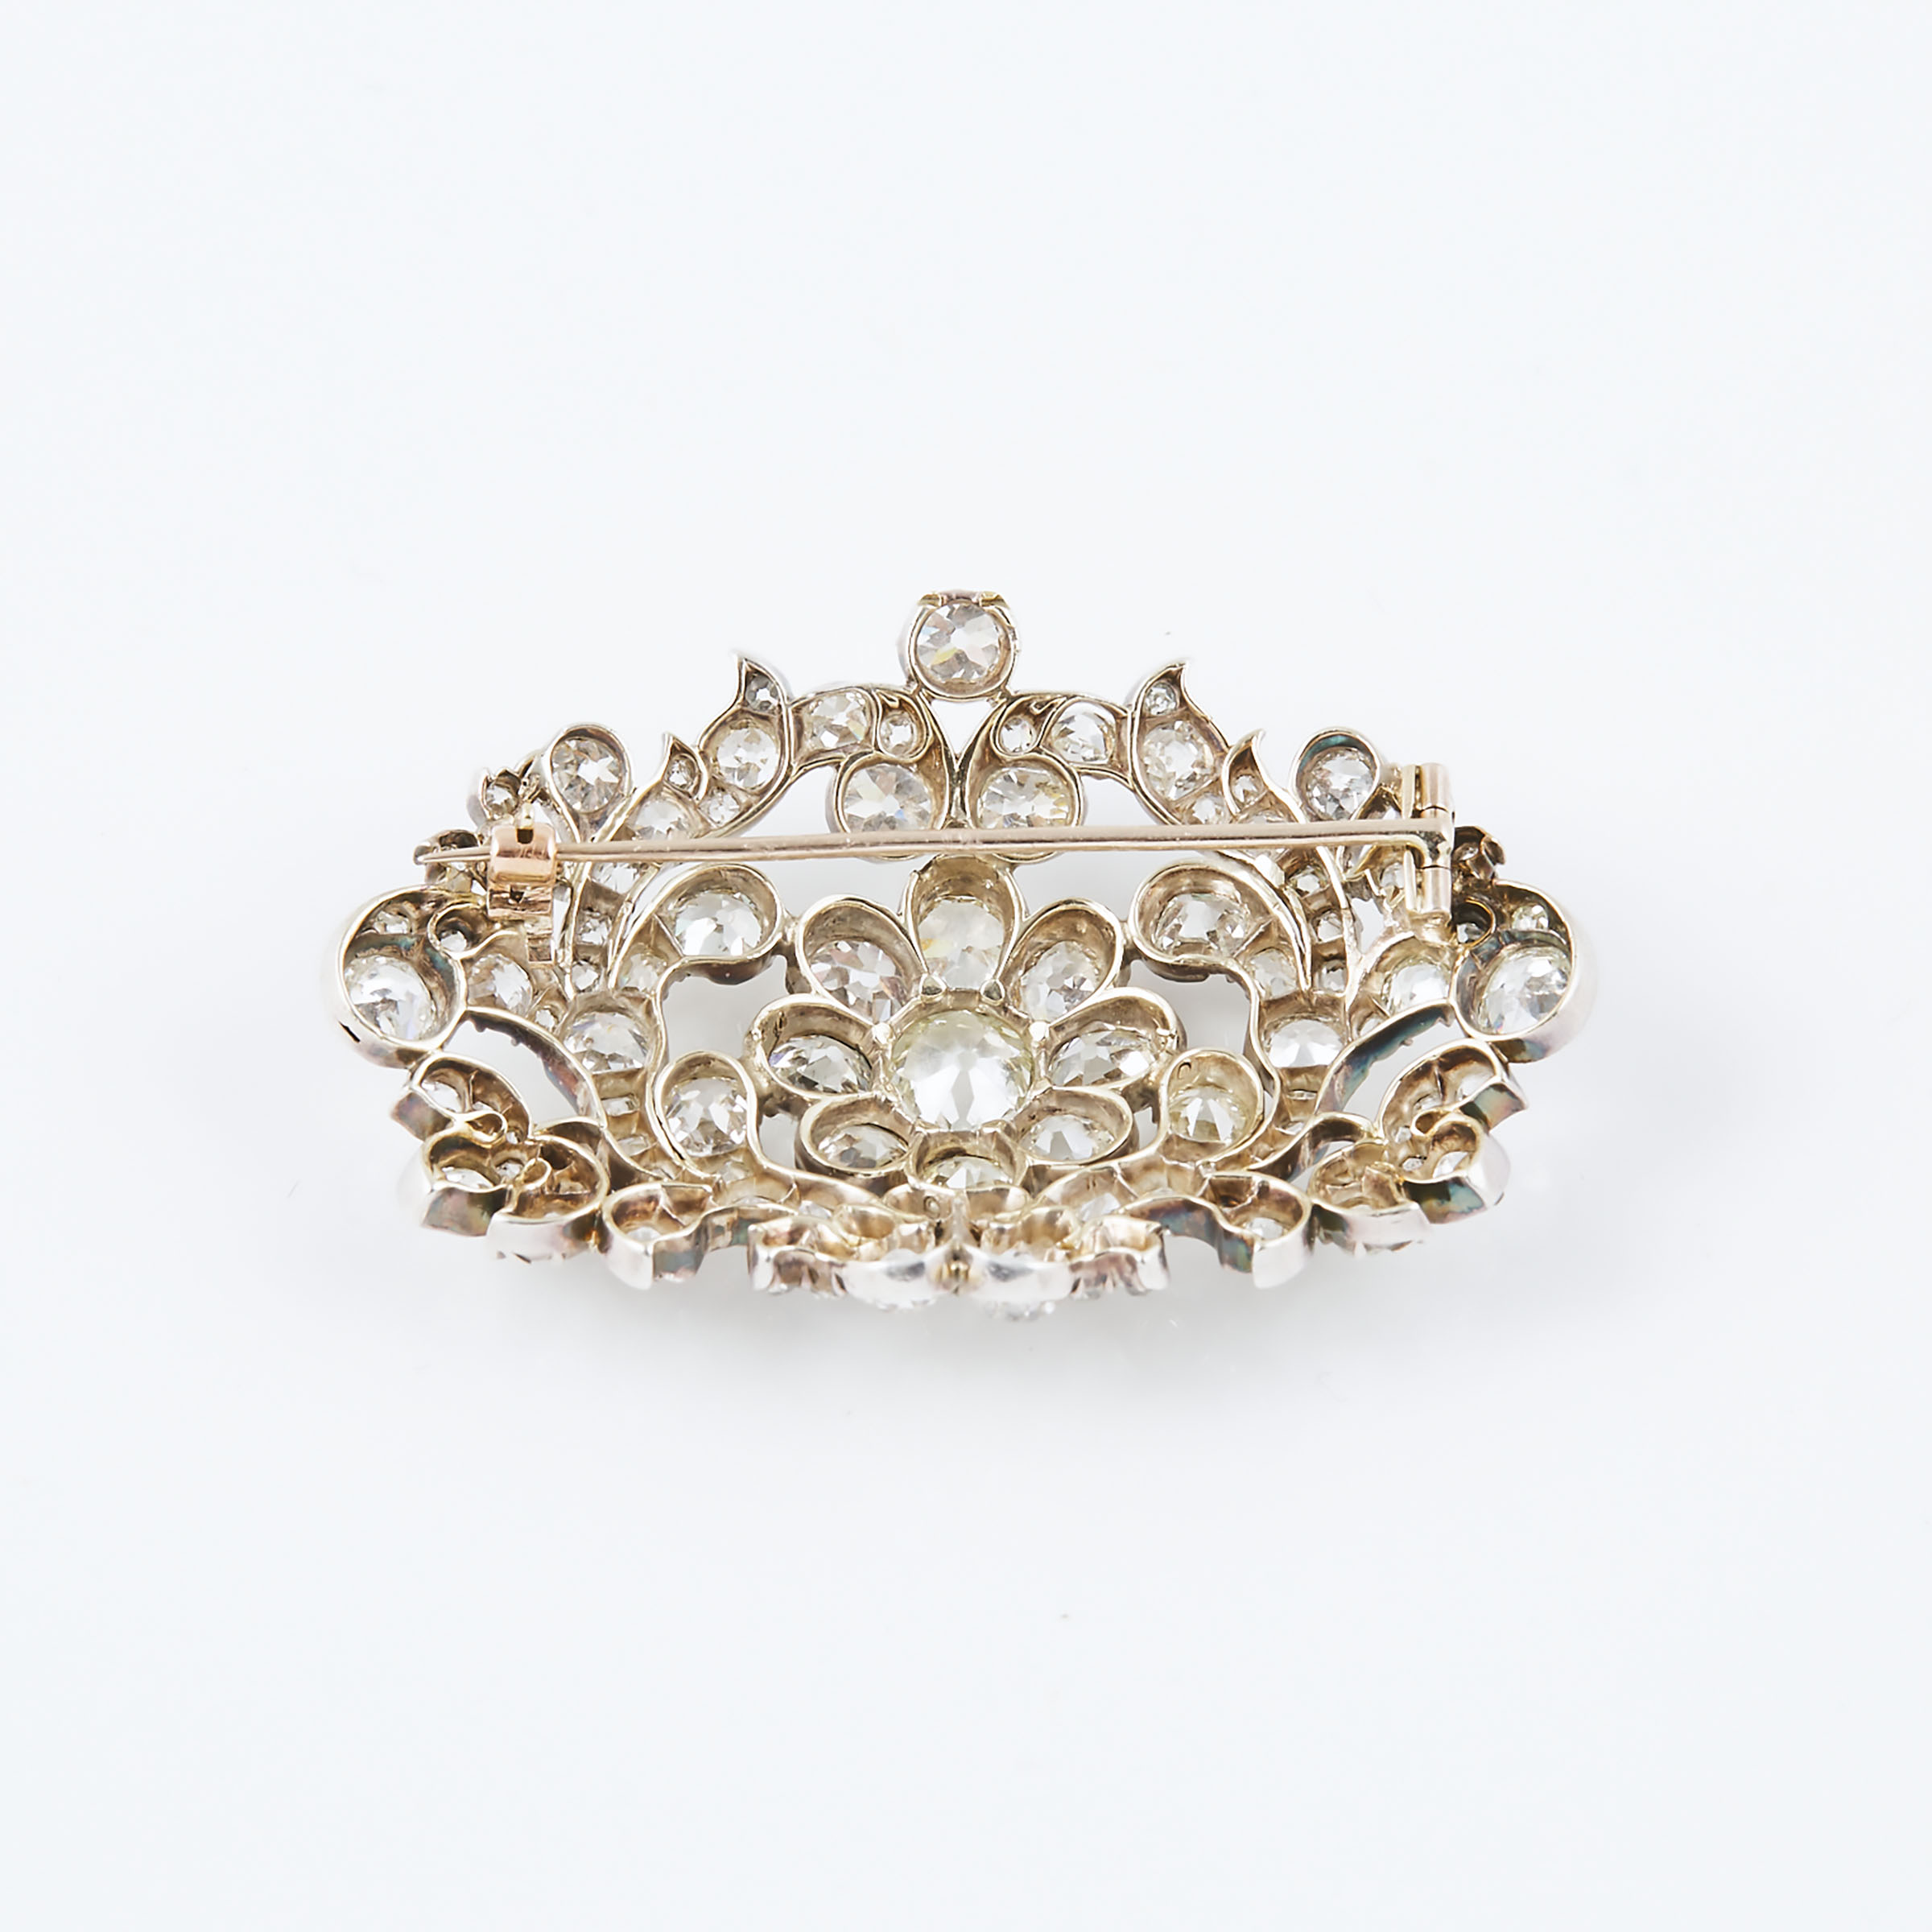 19th Century 14k Yellow Gold And Silver Brooch